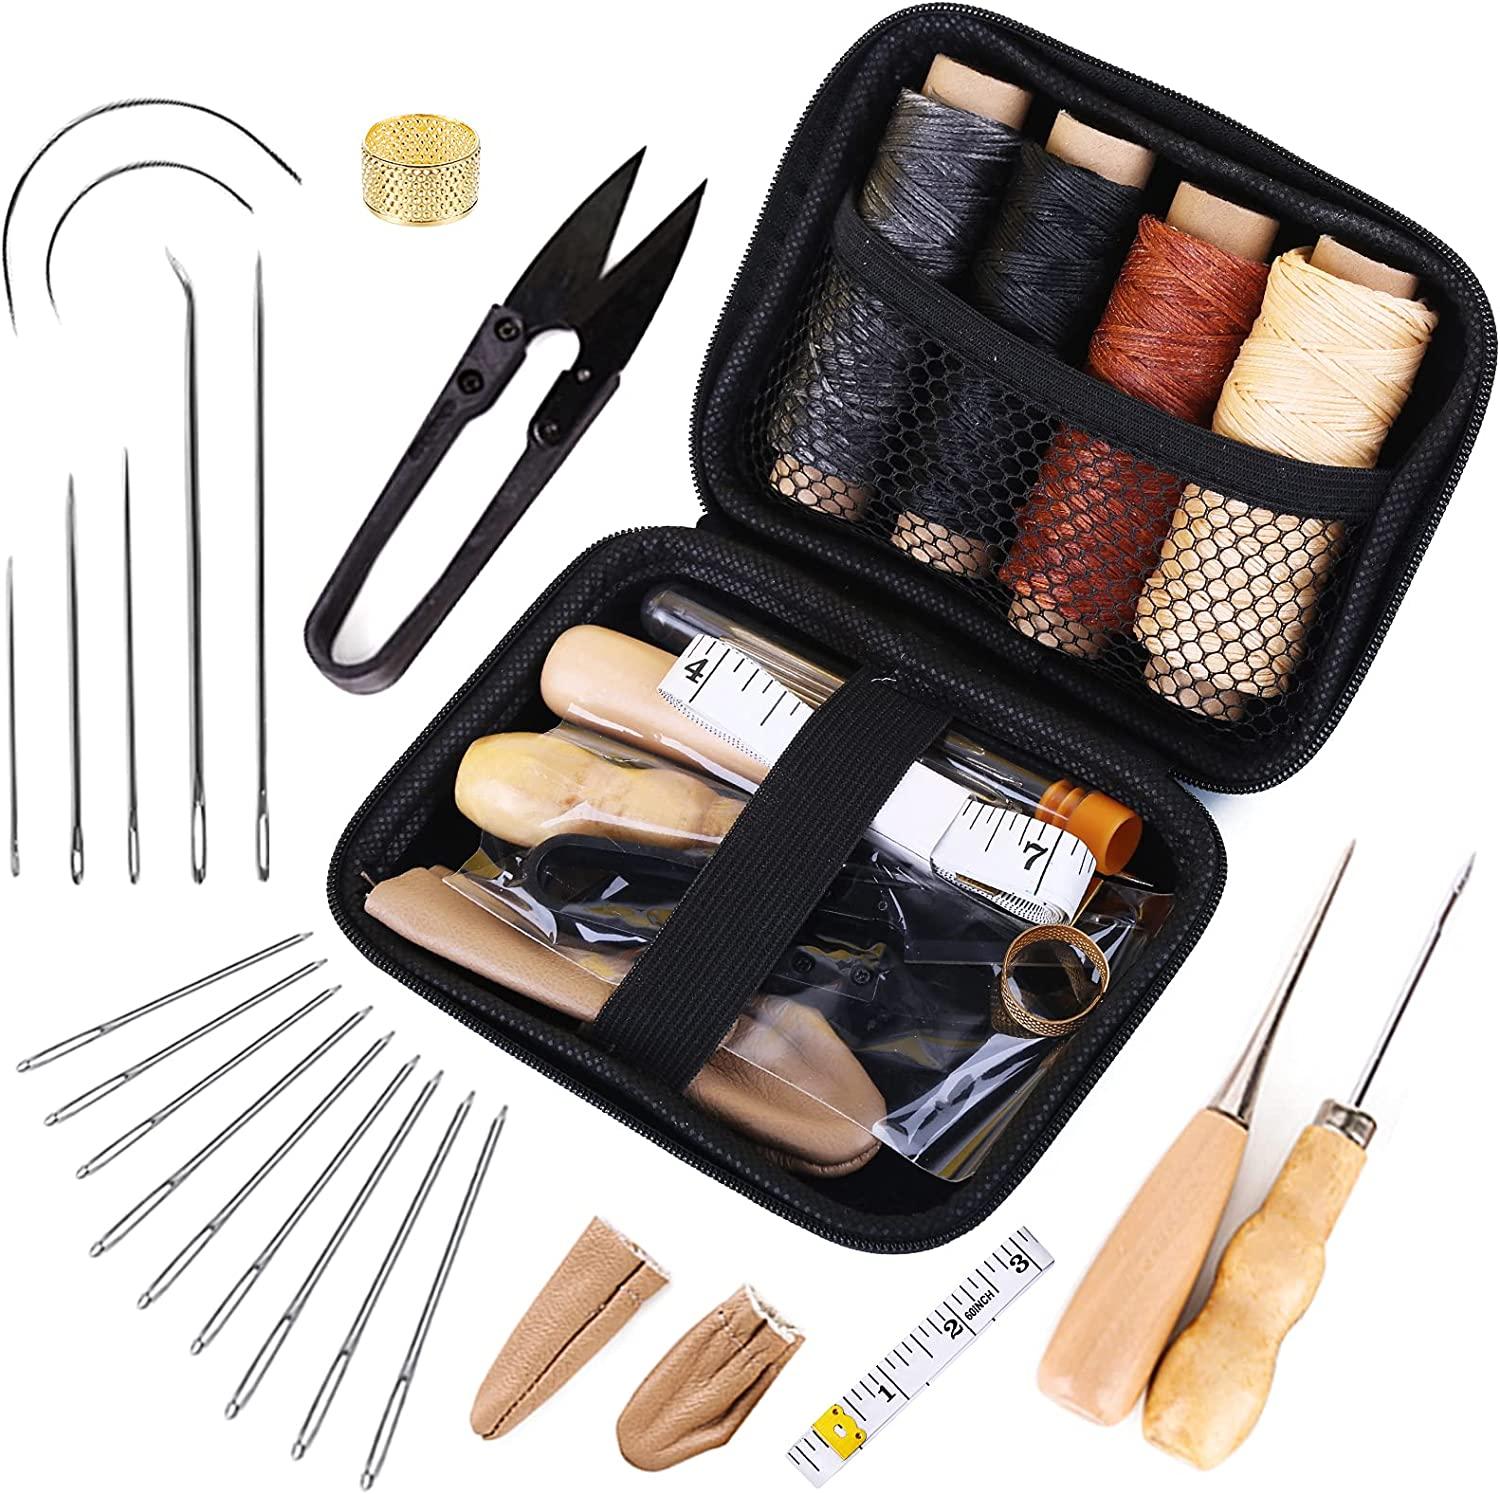 Leather Working Tools Leather Craft Kit and 20 PCS Leather Stamping Tools, Upholstery  Repair Kit with Waxed Thread and Different Shape Saddle for Carving  Leather, Leather Sewing and DIY Craft Making 